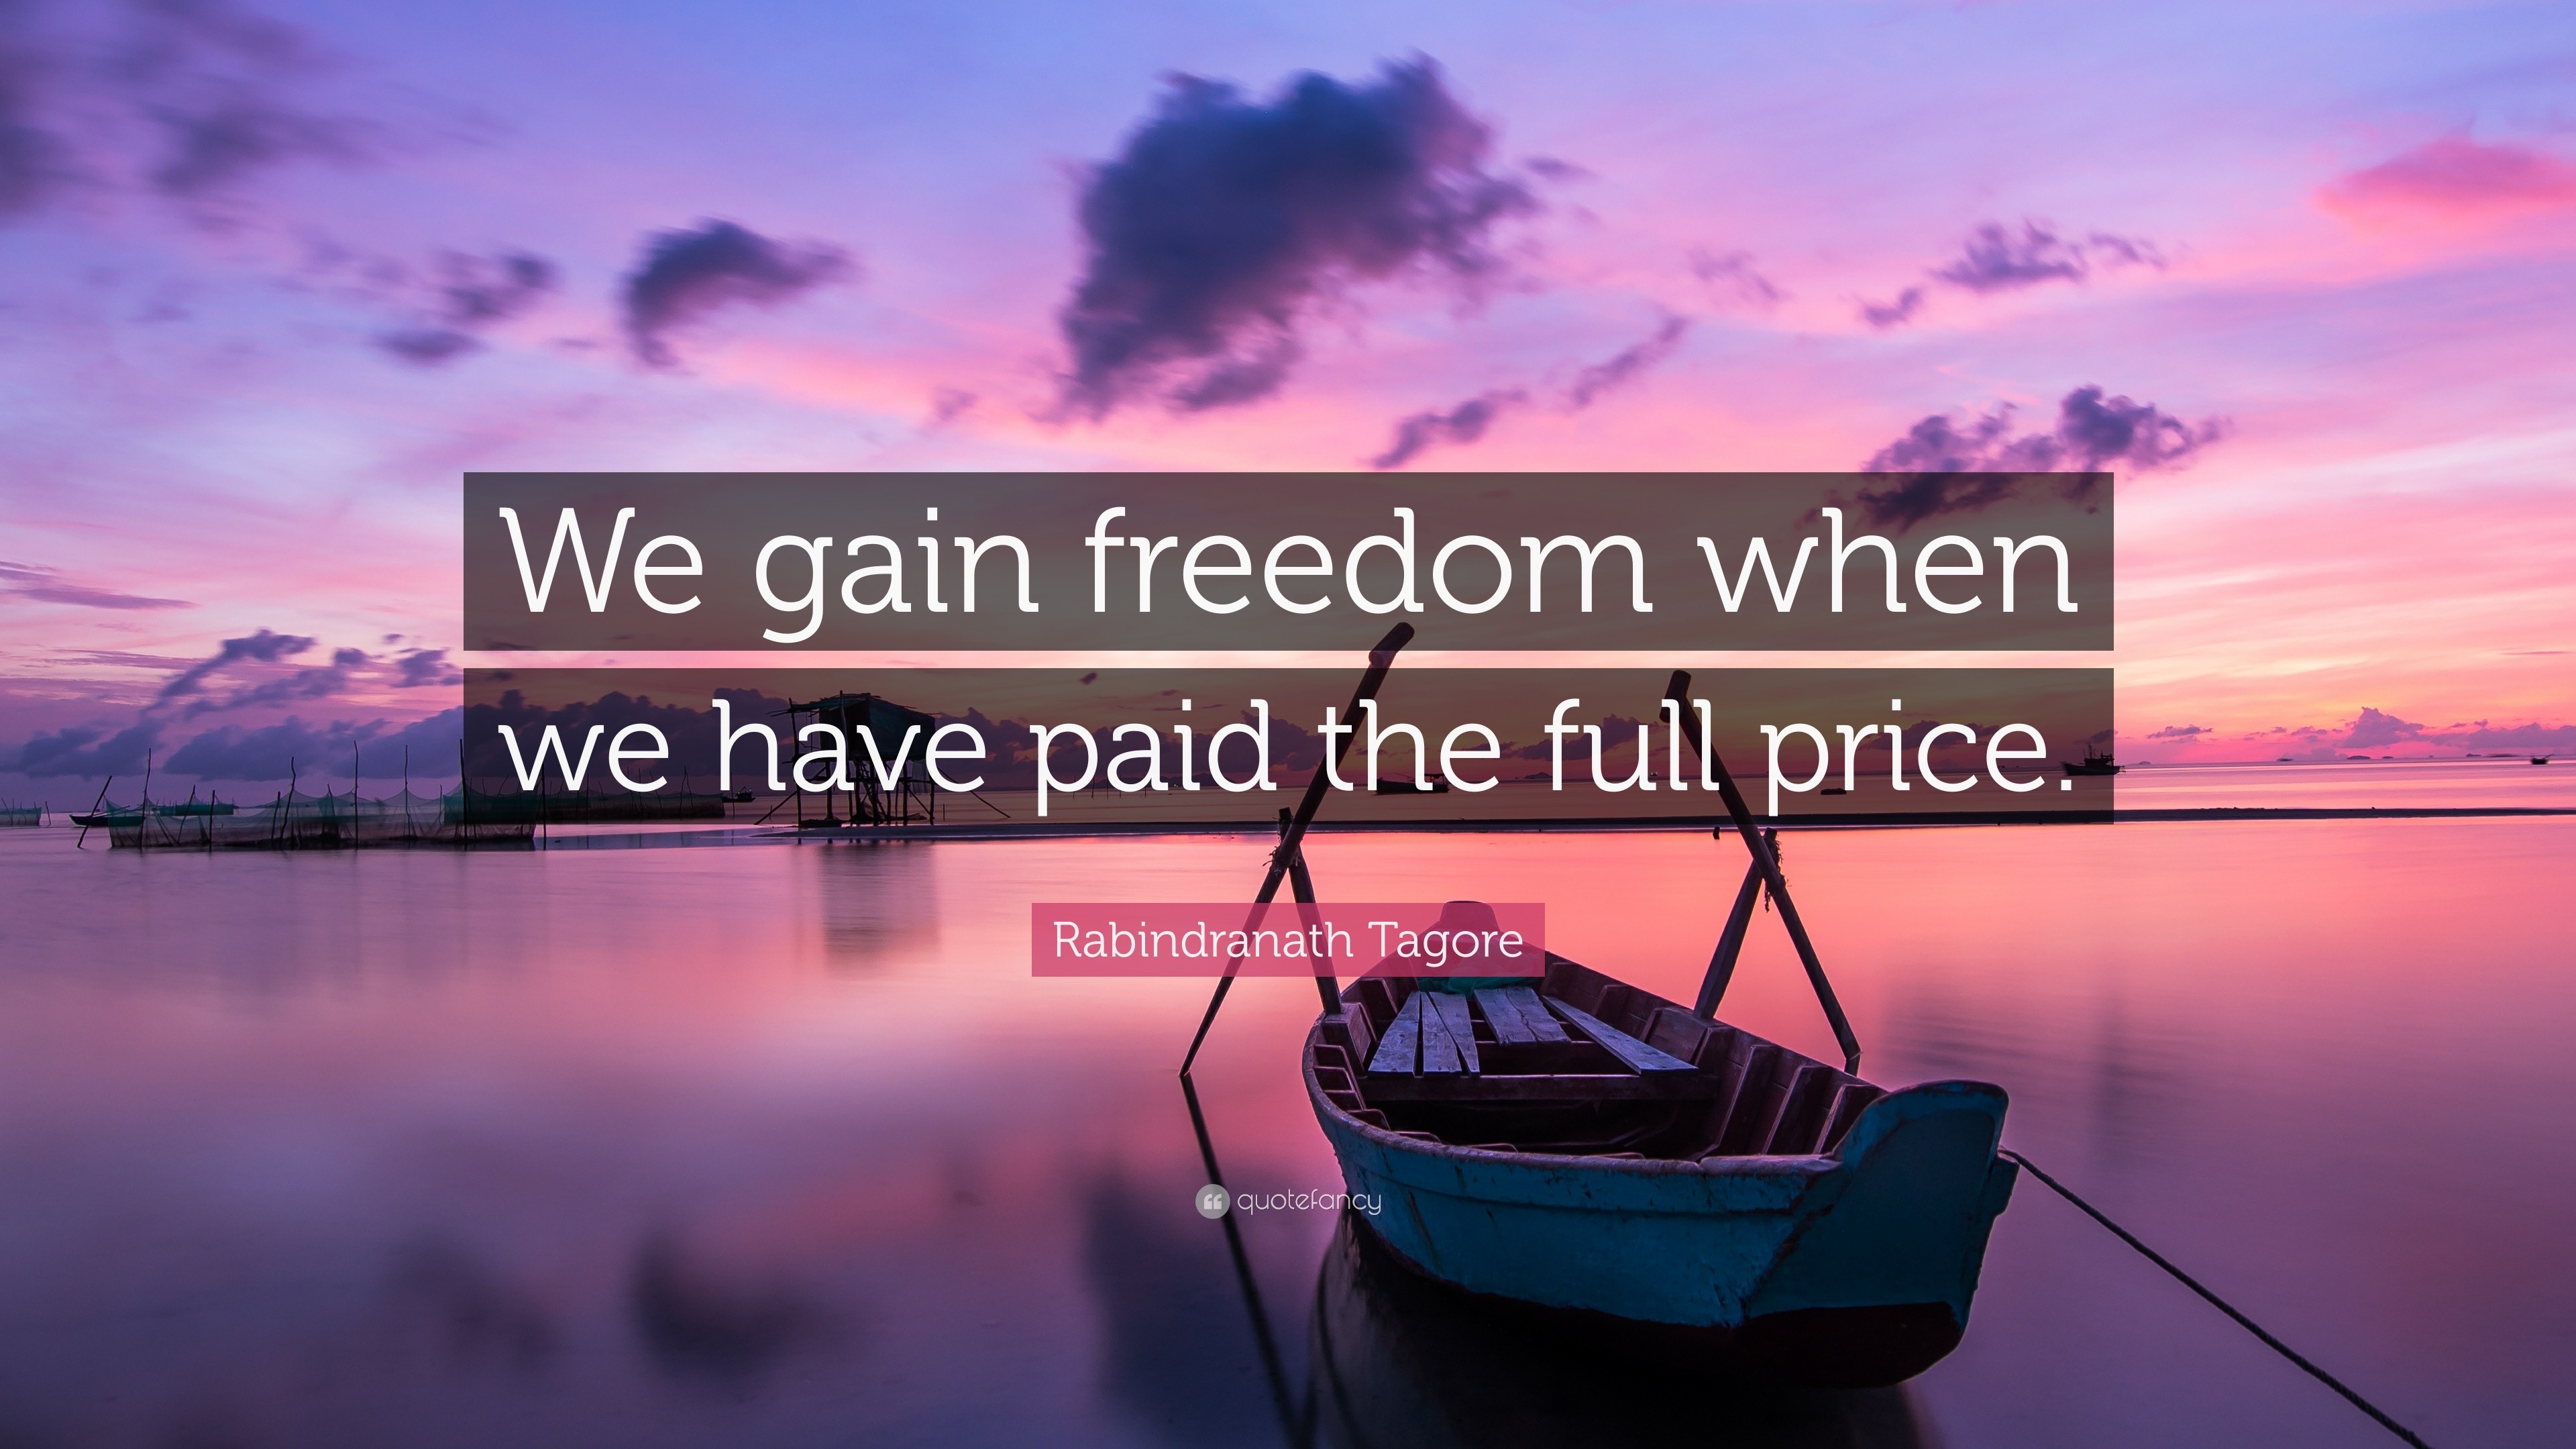 Rabindranath Tagore Quote: “We gain freedom when we have paid the full  price.”